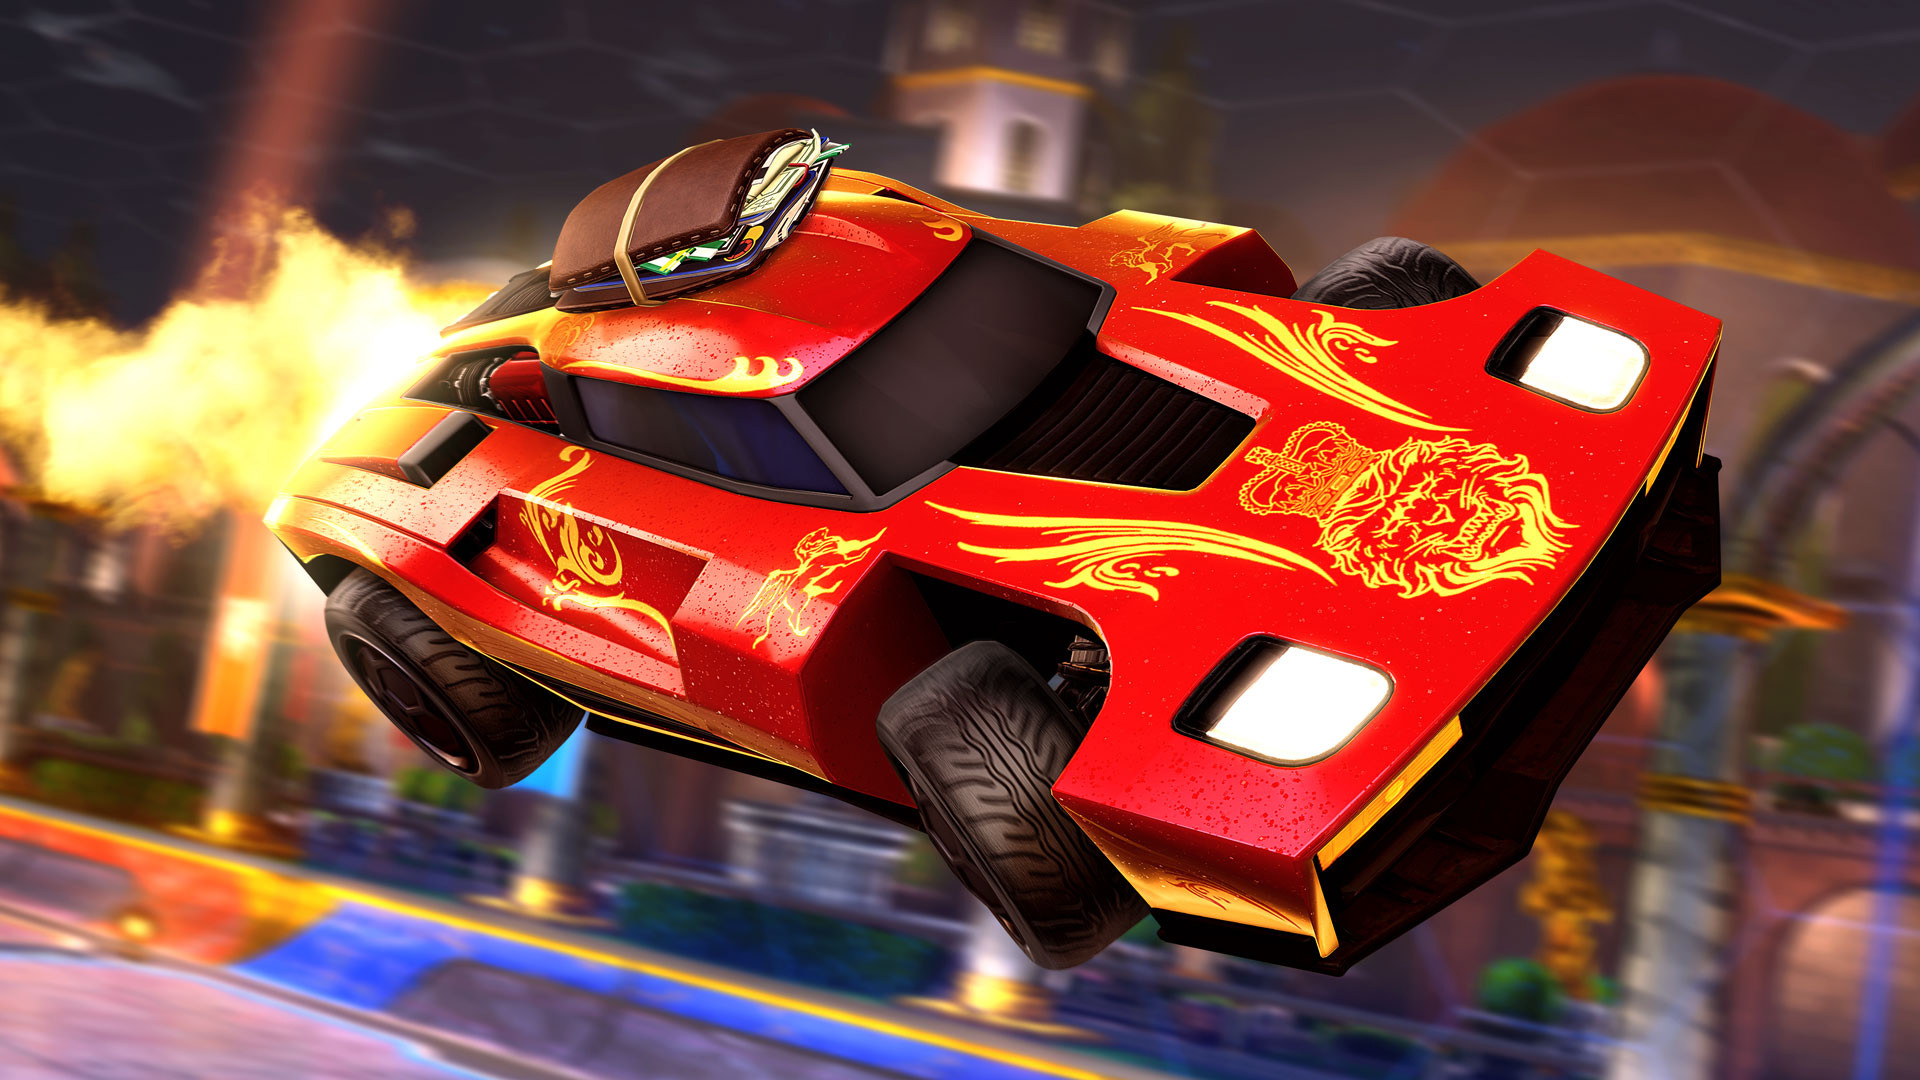 Rocket League Tournaments Beta: The Finals - Who Will be Champion — Steemit